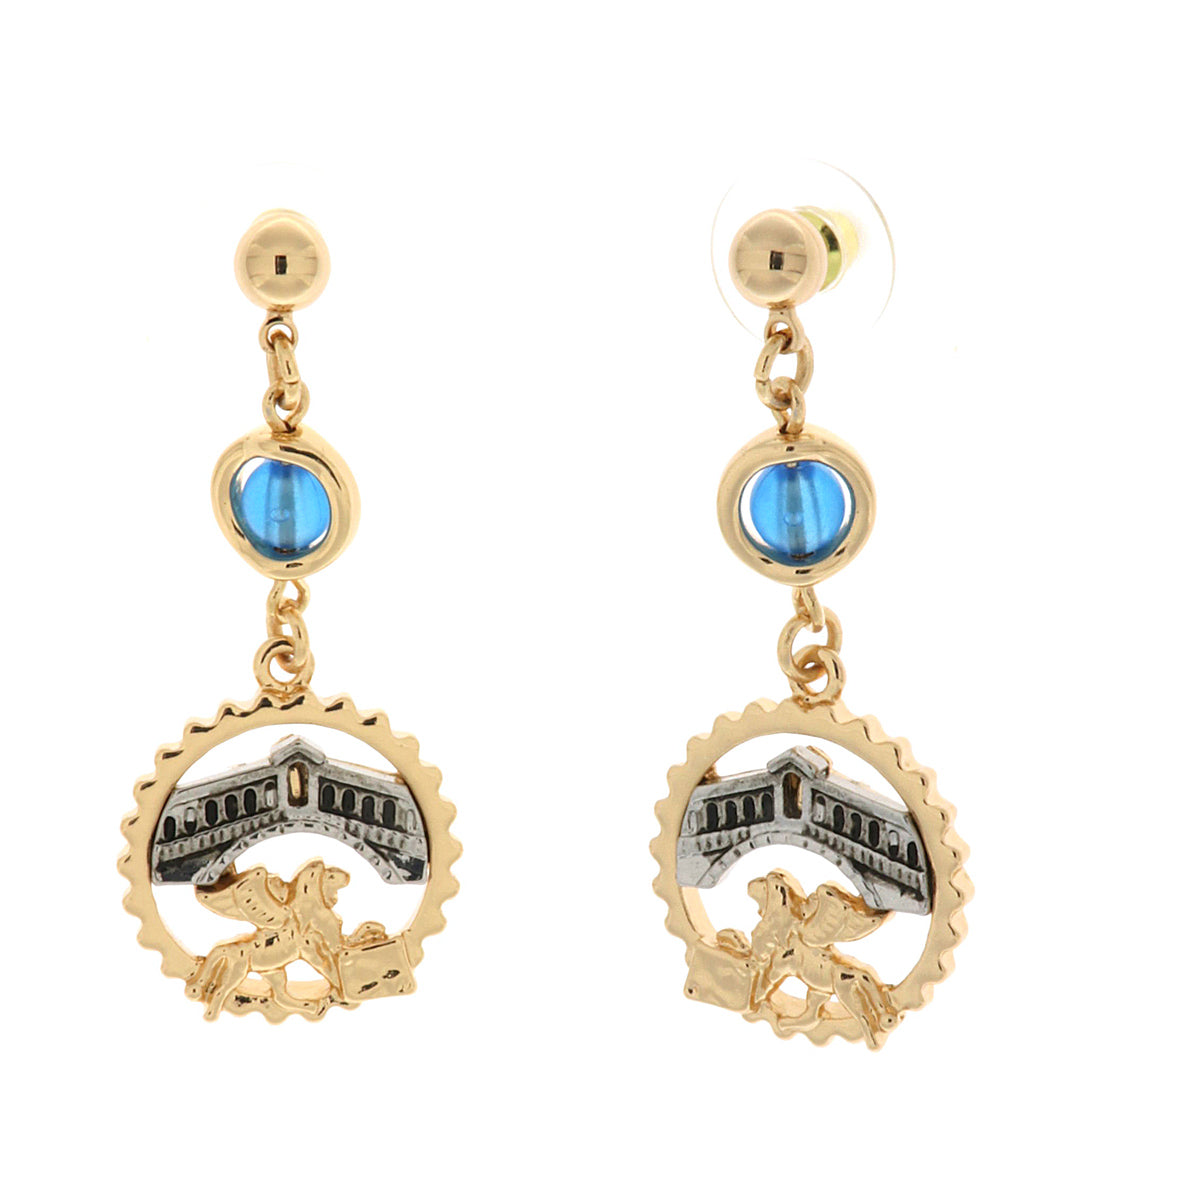 Metal earrings with rialto bridge and winged lion